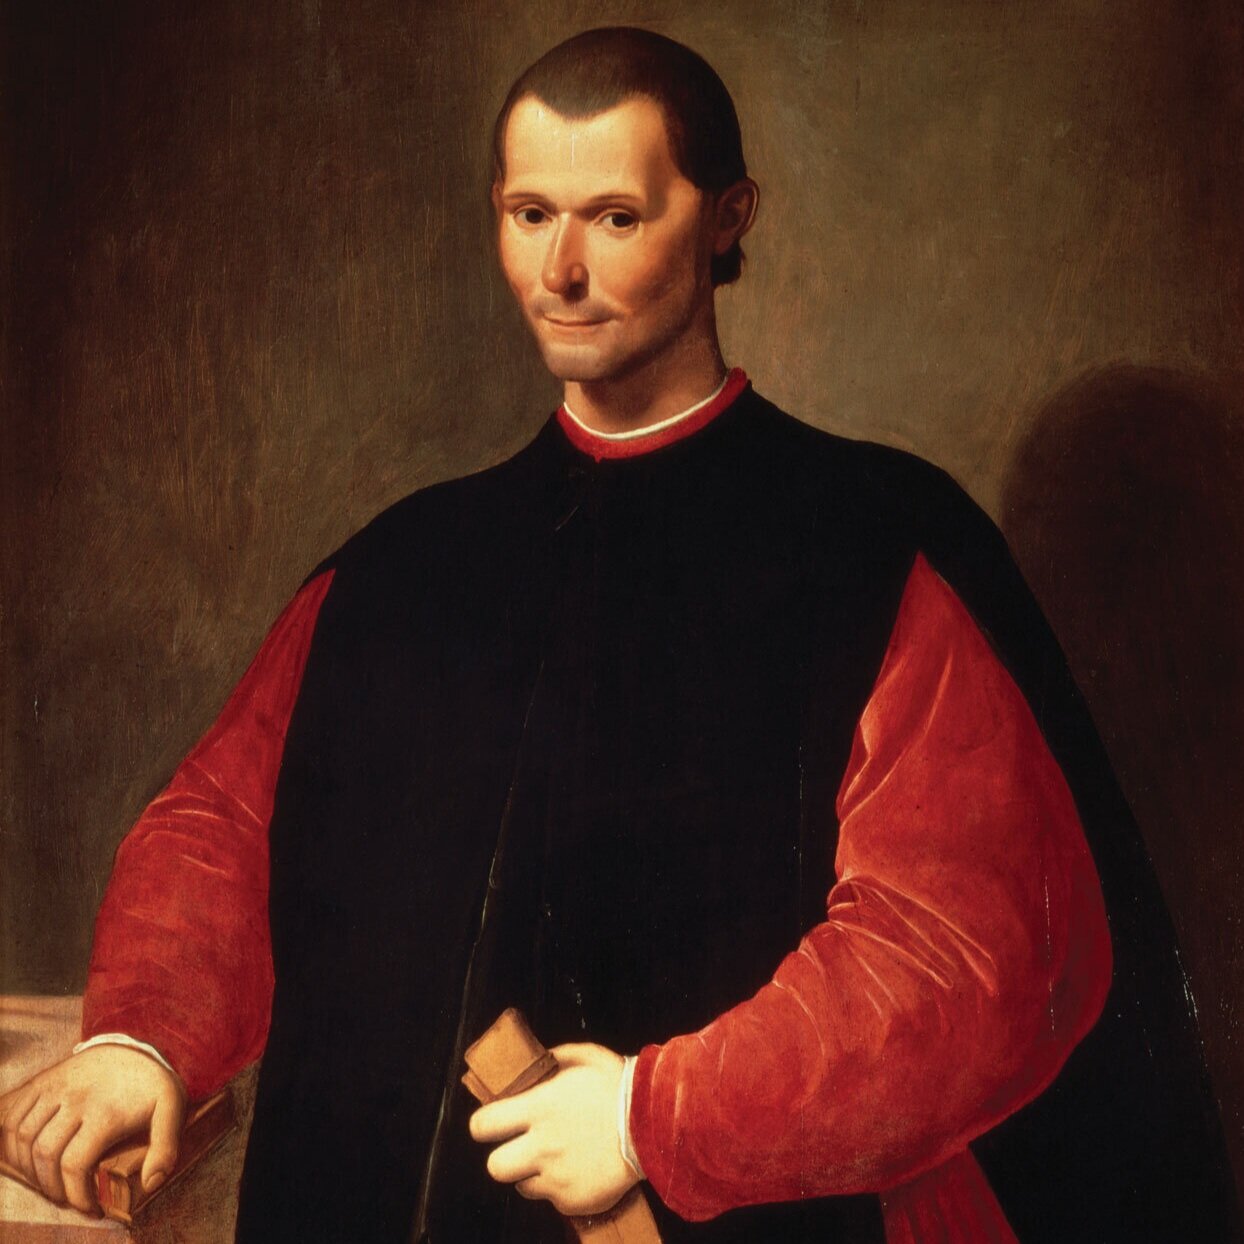 163: Machiavelli’s ”The Prince” or ”How to kill friends and influence people.”